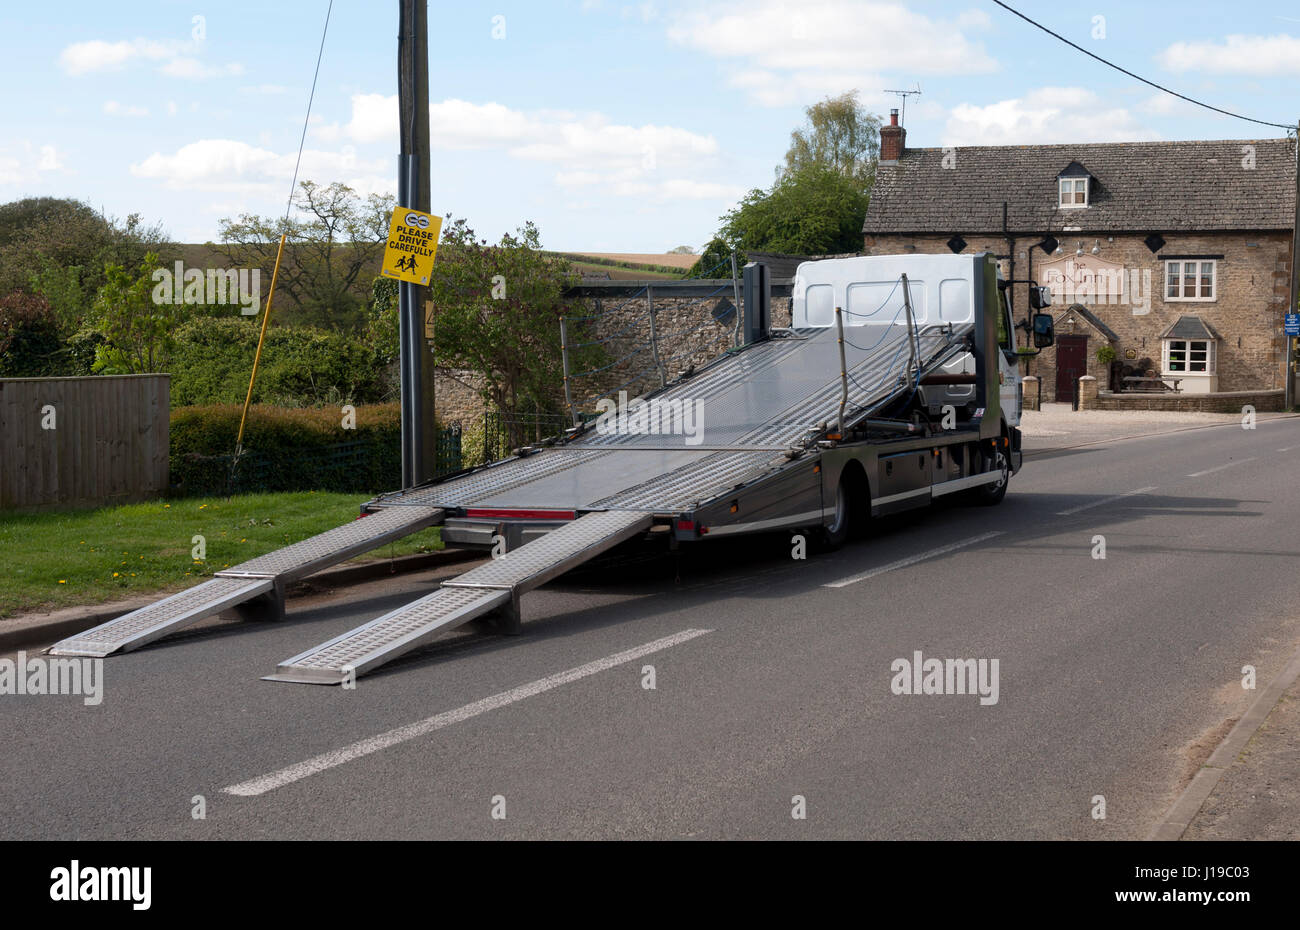 Car transporter with its ramps down, Oxfordshire, UK Stock Photo